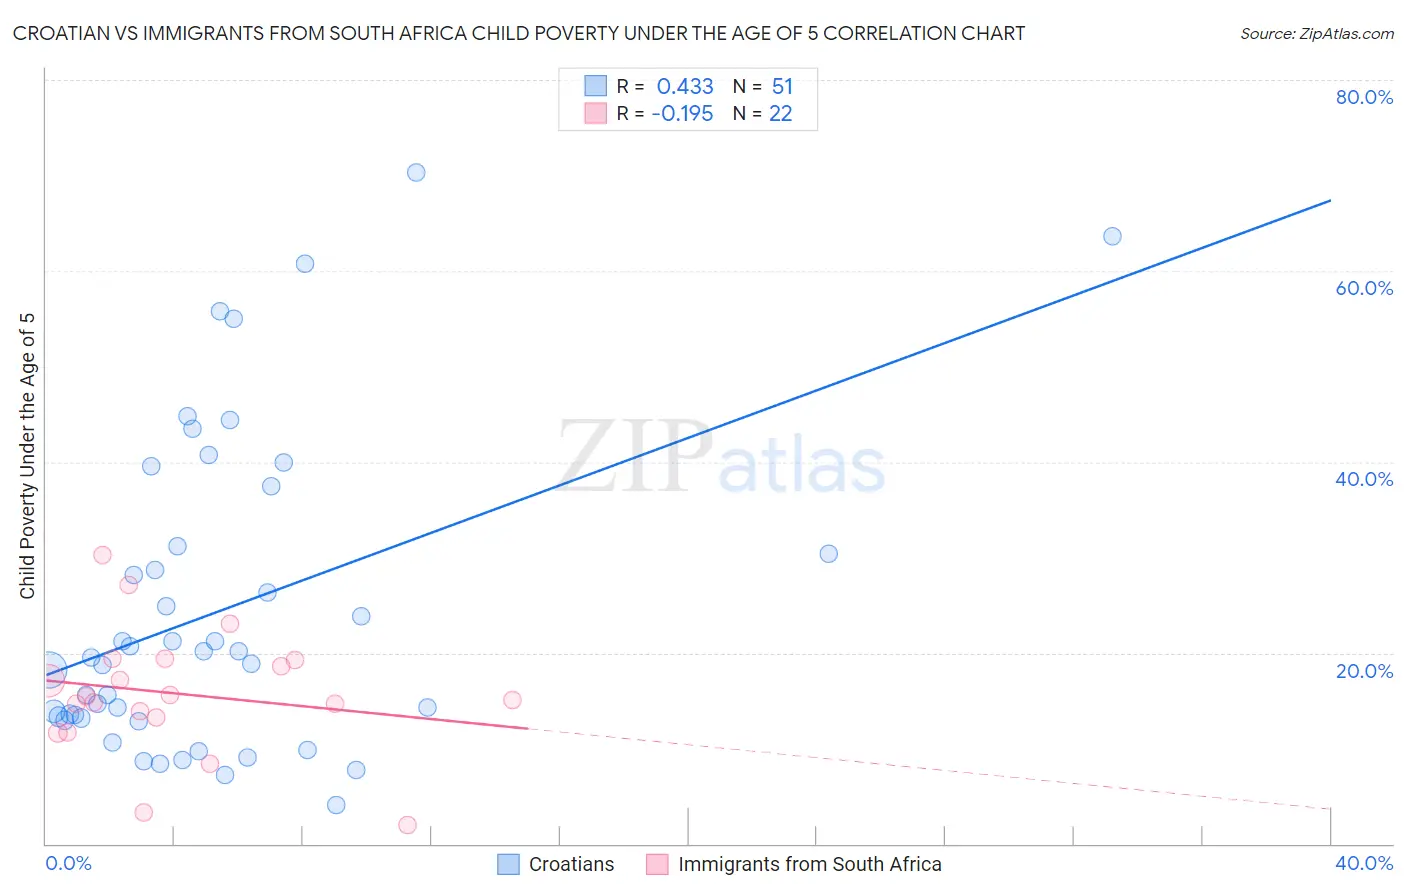 Croatian vs Immigrants from South Africa Child Poverty Under the Age of 5